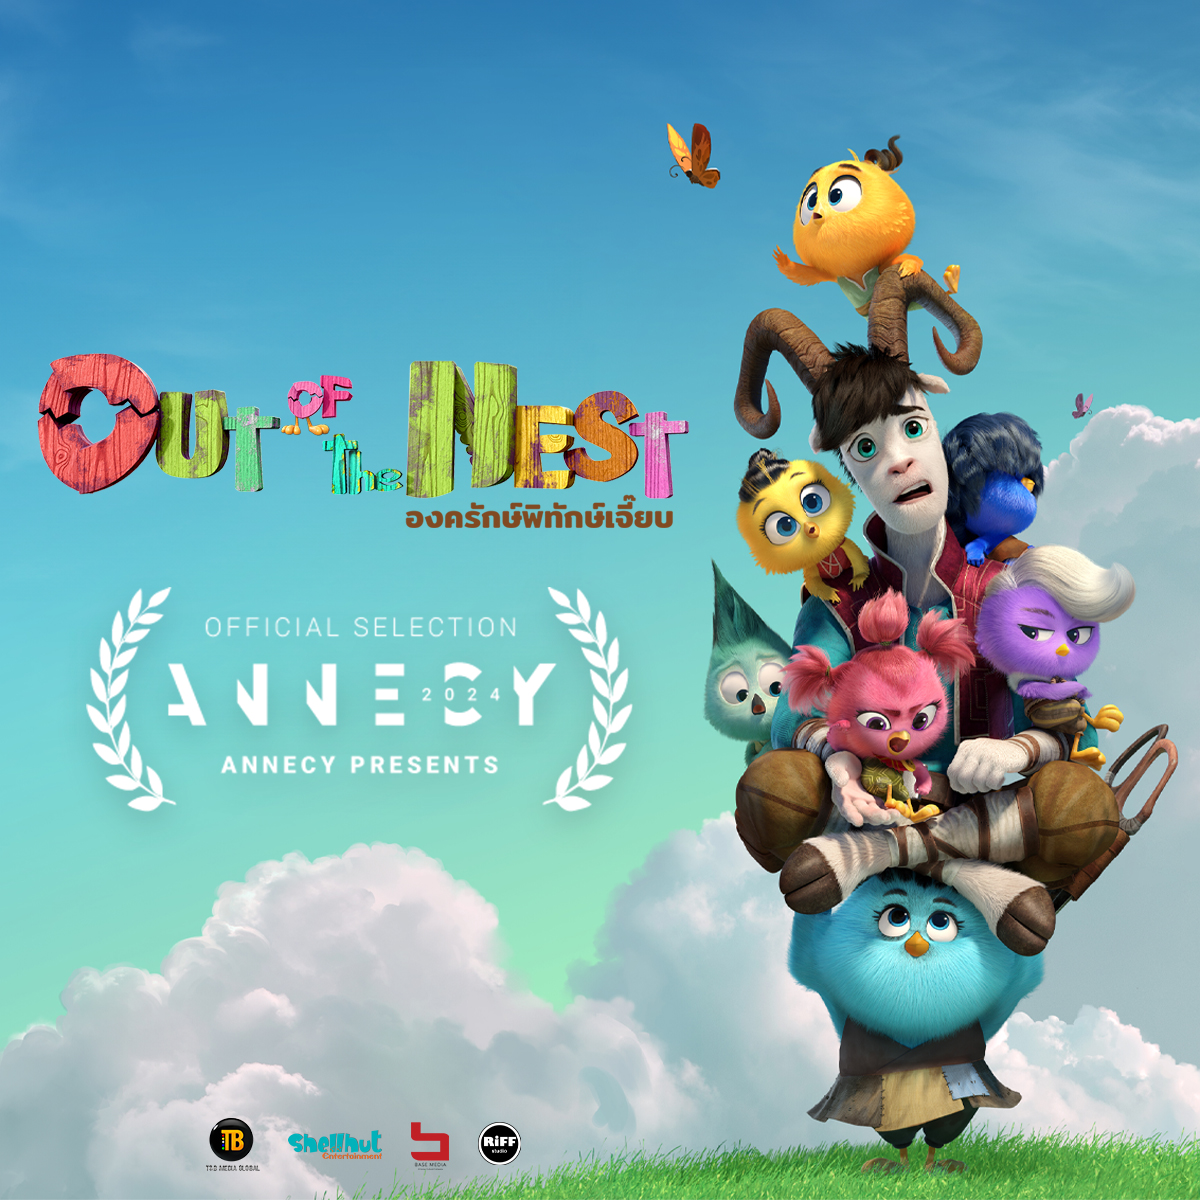 T&B is thrilled to announce that our animated feature film, #OutofTheNest has been selected by one of the world's most prestigious animation festivals, Annecy International Animation Film Festival, to be showcased in their new #AnnecyPresents selection. 

#AnnecyFestival